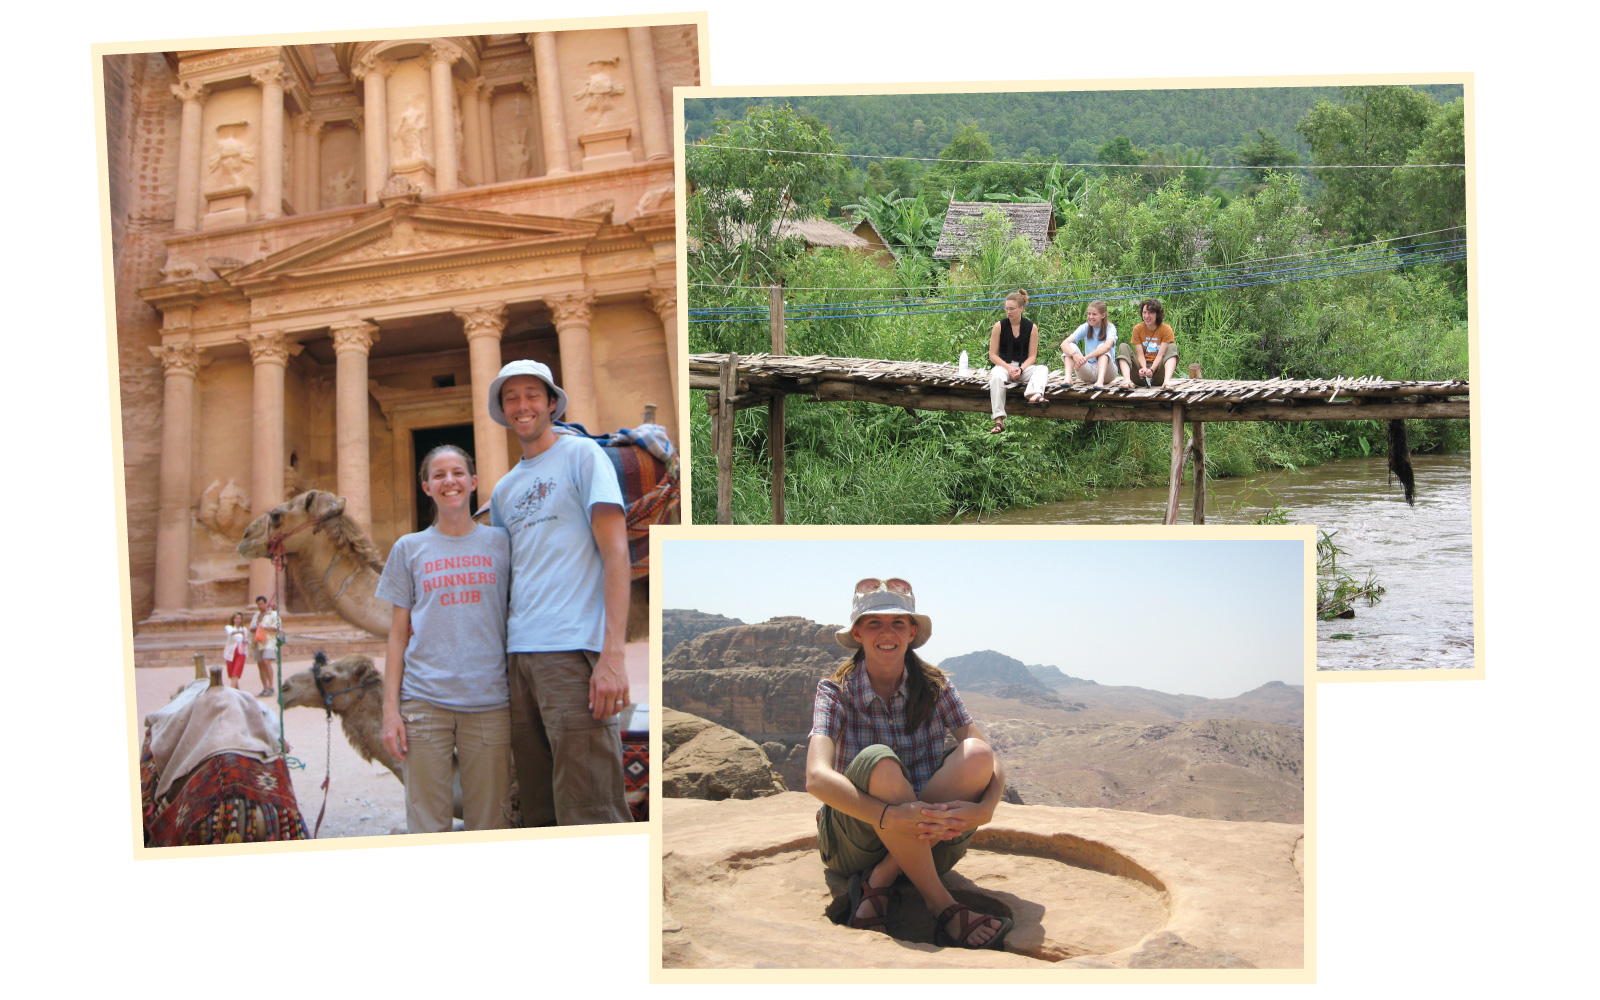 Mary Ann Bates’ travels during her time at Denison and after graduation have influenced her work at J-PAL. Those travels included stops in Petra, Jordan (left, with her husband Matthew; and bottom right) and Thailand (top right).